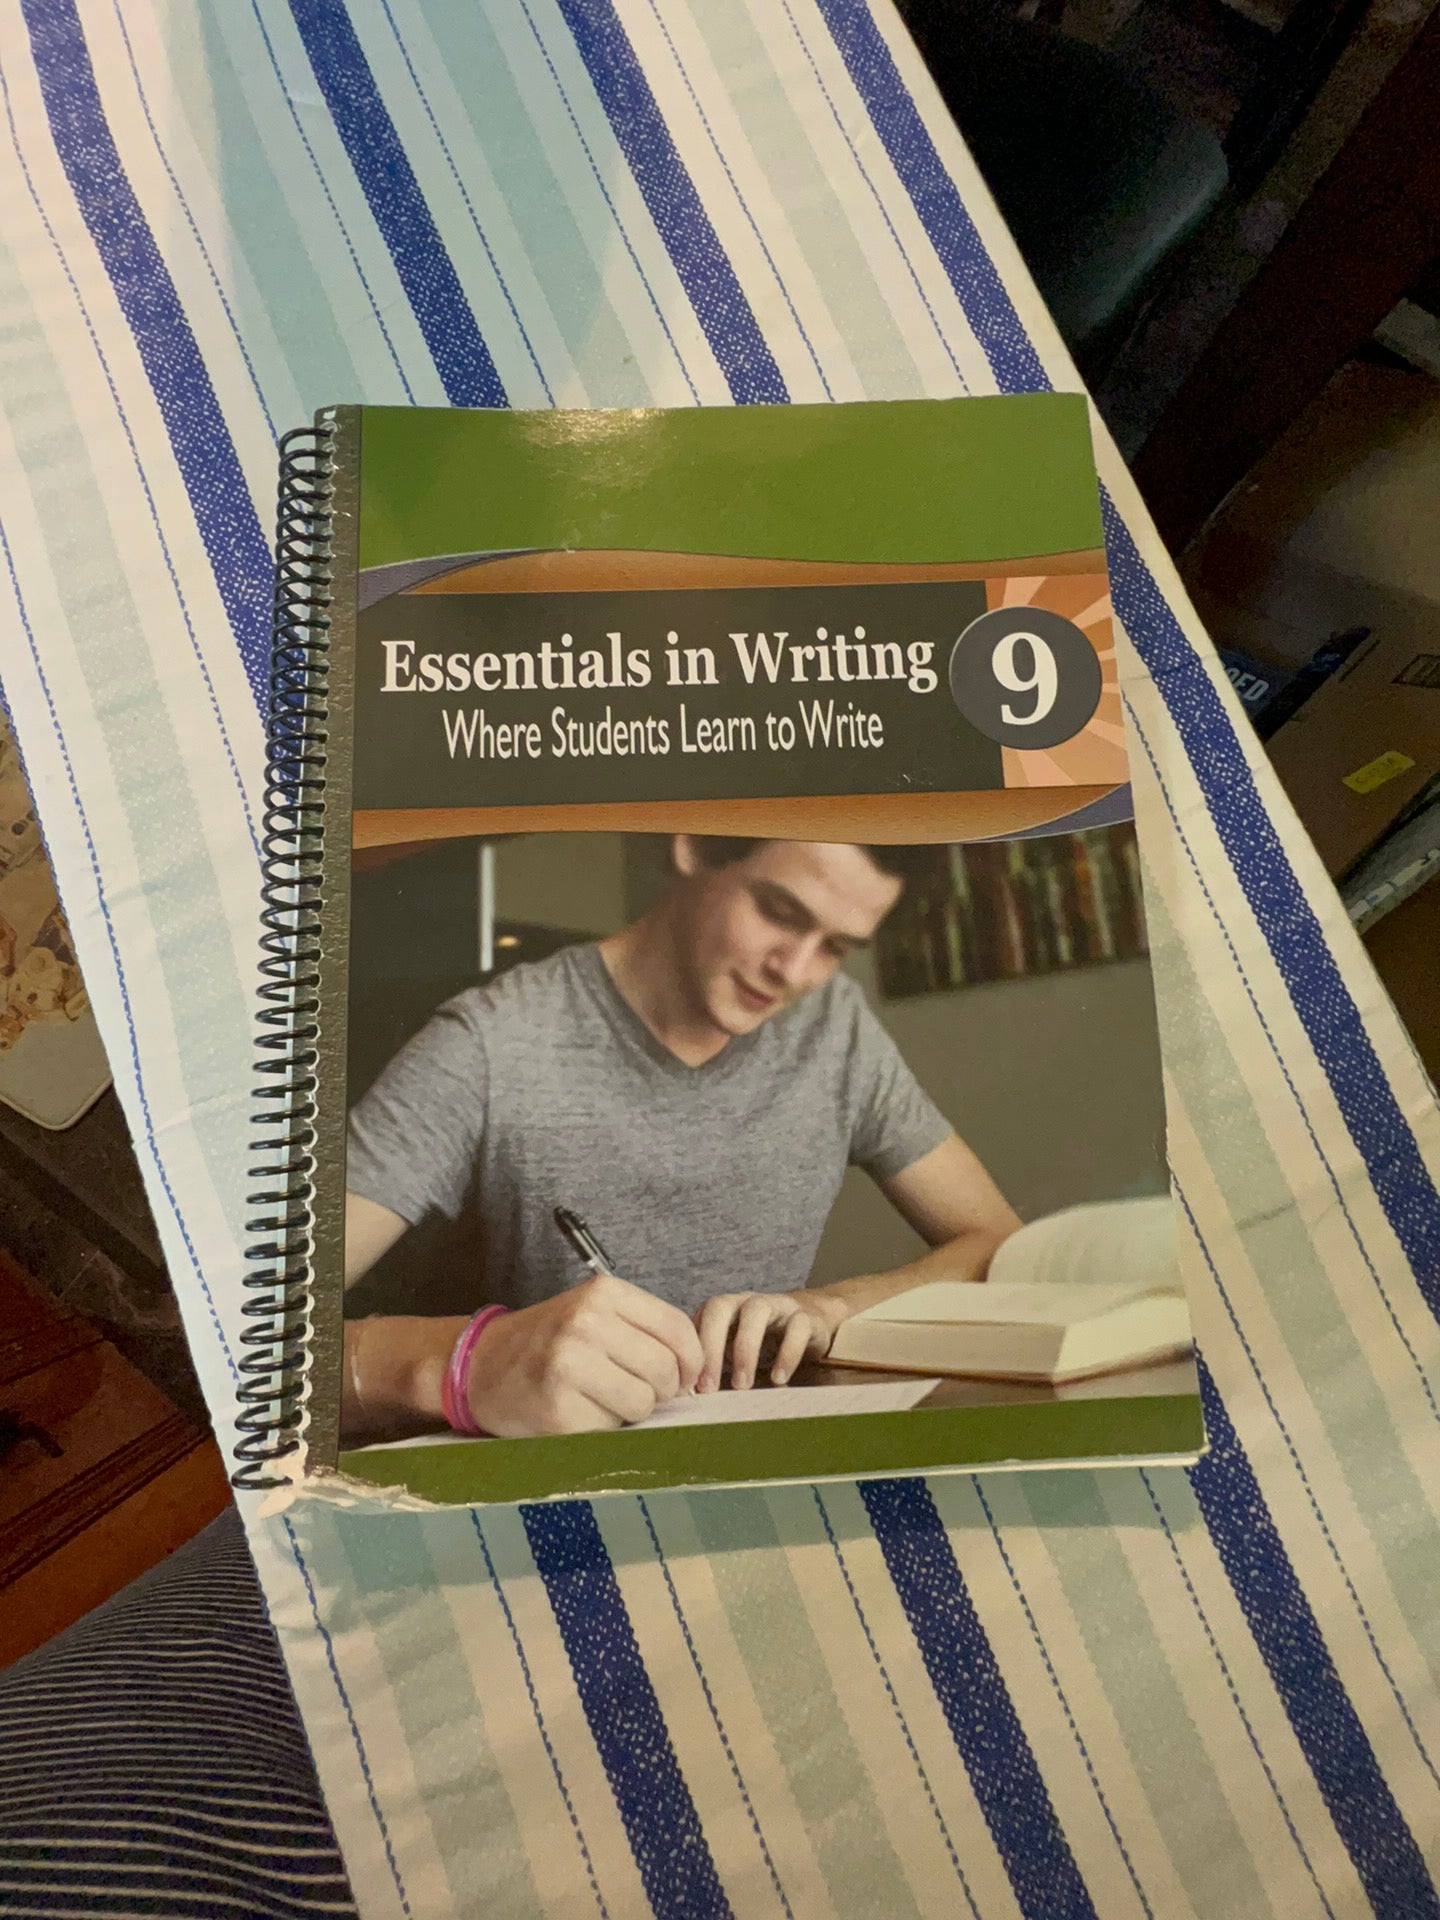 Essentials　Level　Paperback　Writing　by　in　Stephens,　Pangobooks　Textbook　Matthew